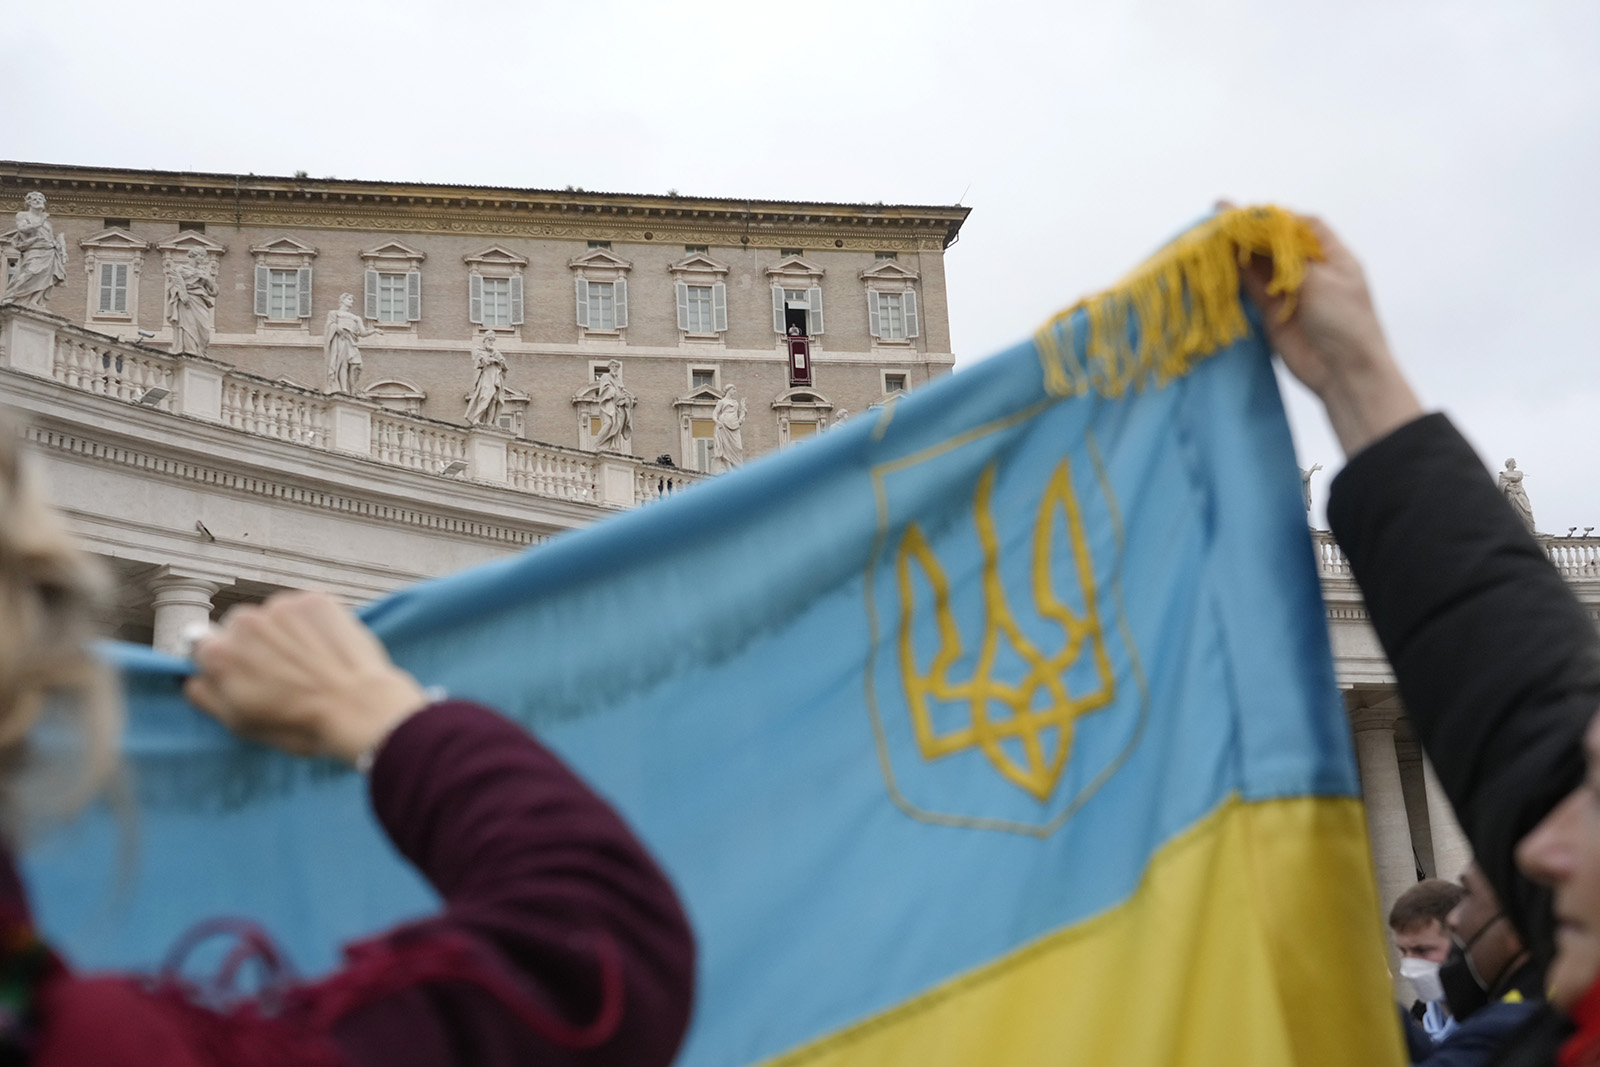 Ukrainian faithful hold their national flag as Pope Francis delivers the Angelus noon prayer from his studio window overlooking St. Peter’s Square, at the Vatican, Feb. 20, 2022. (AP Photo/Gregorio Borgia)